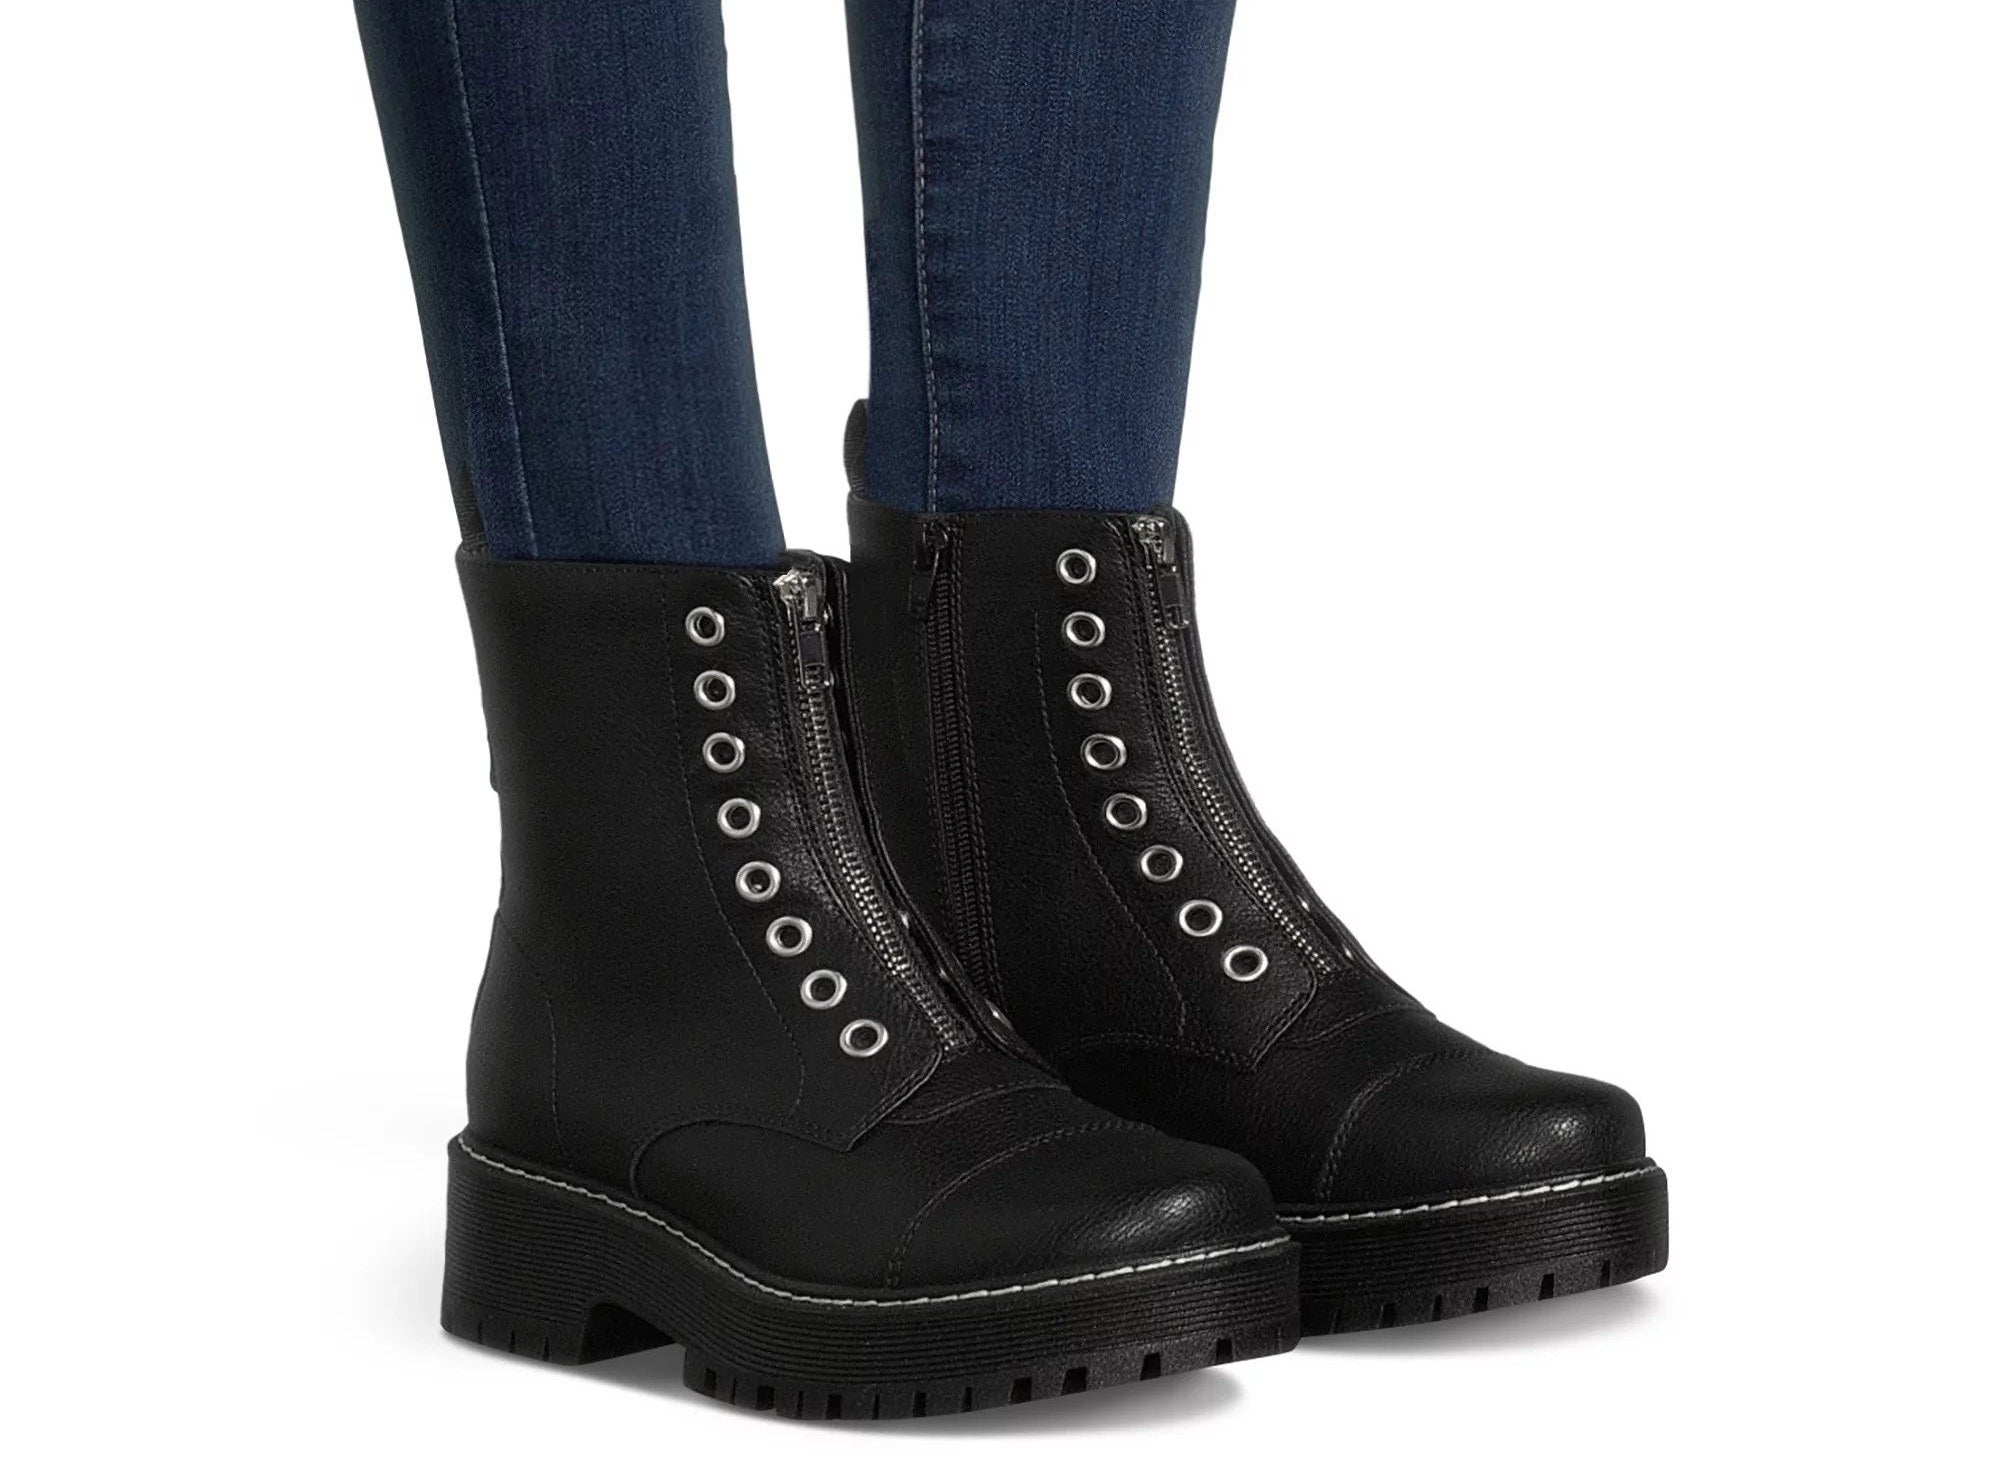 The black boots, with grommets and a zipper design in the front, contrast stitching, lug soles, and side zippers